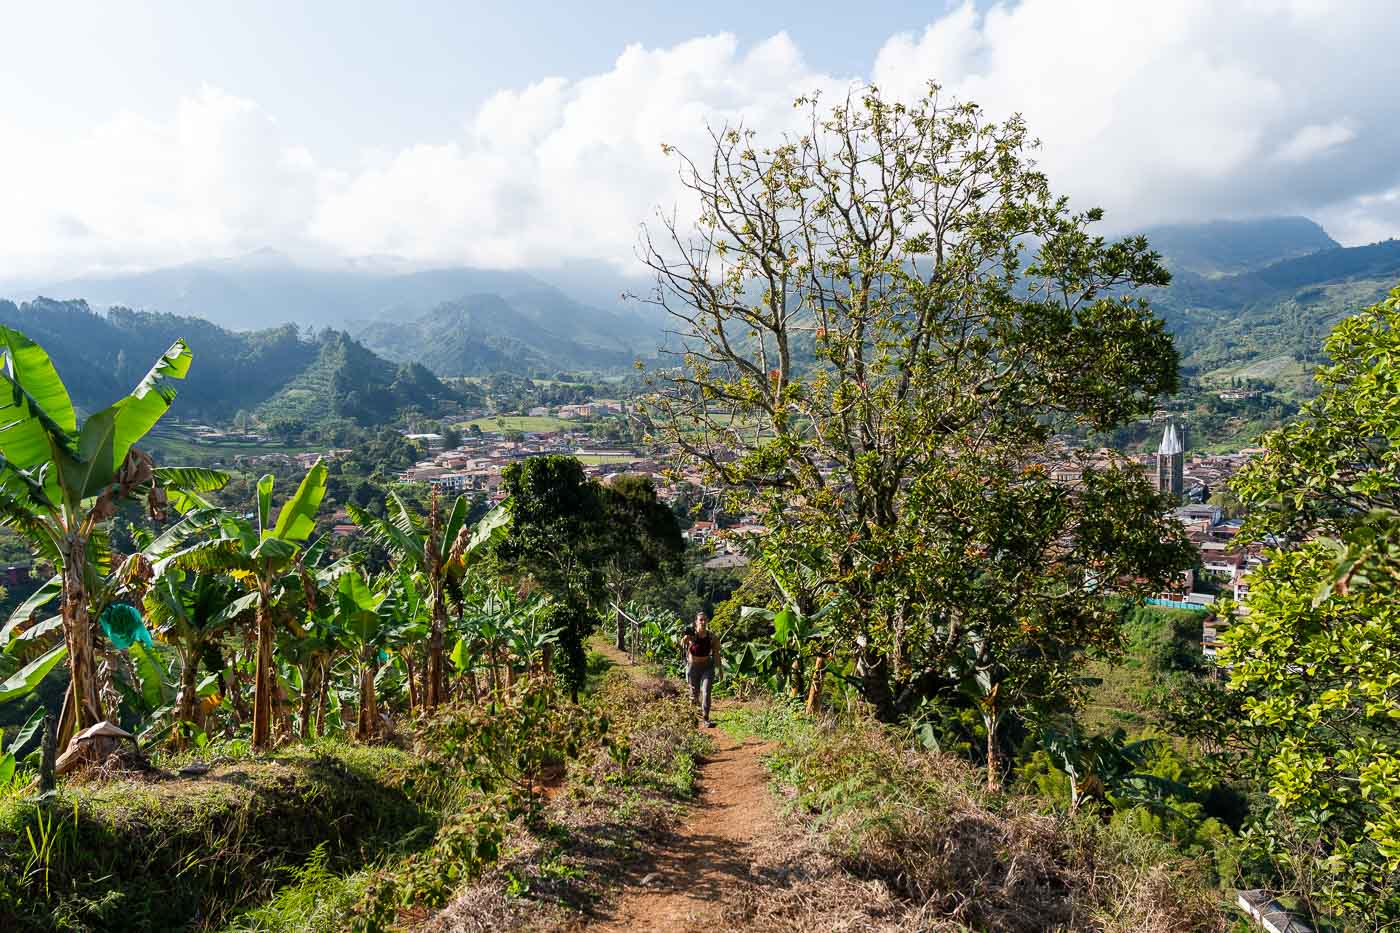 Sara walking up the Cristo Rey trail with trees one side, a banana farm the other side and Jardin in the distance.